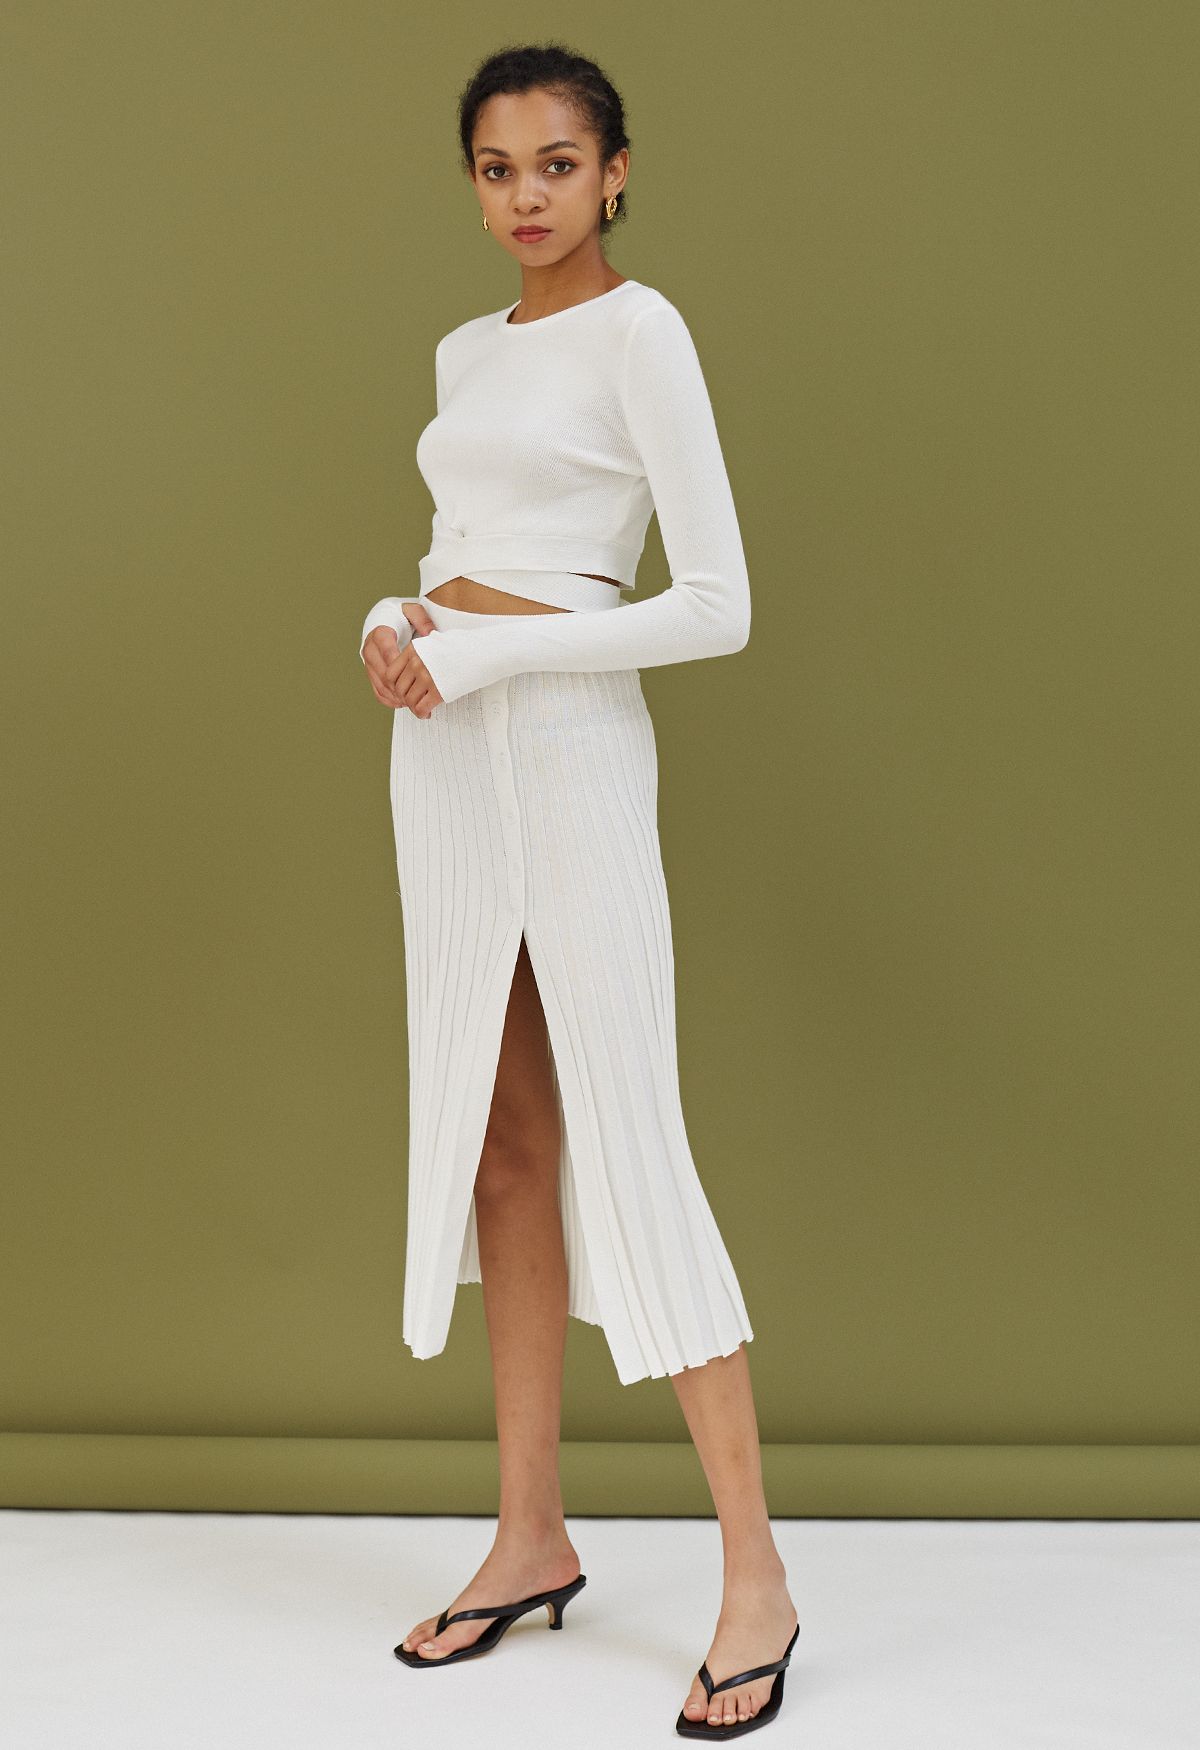 Buttoned Front Slit Rib Knit Skirt in White